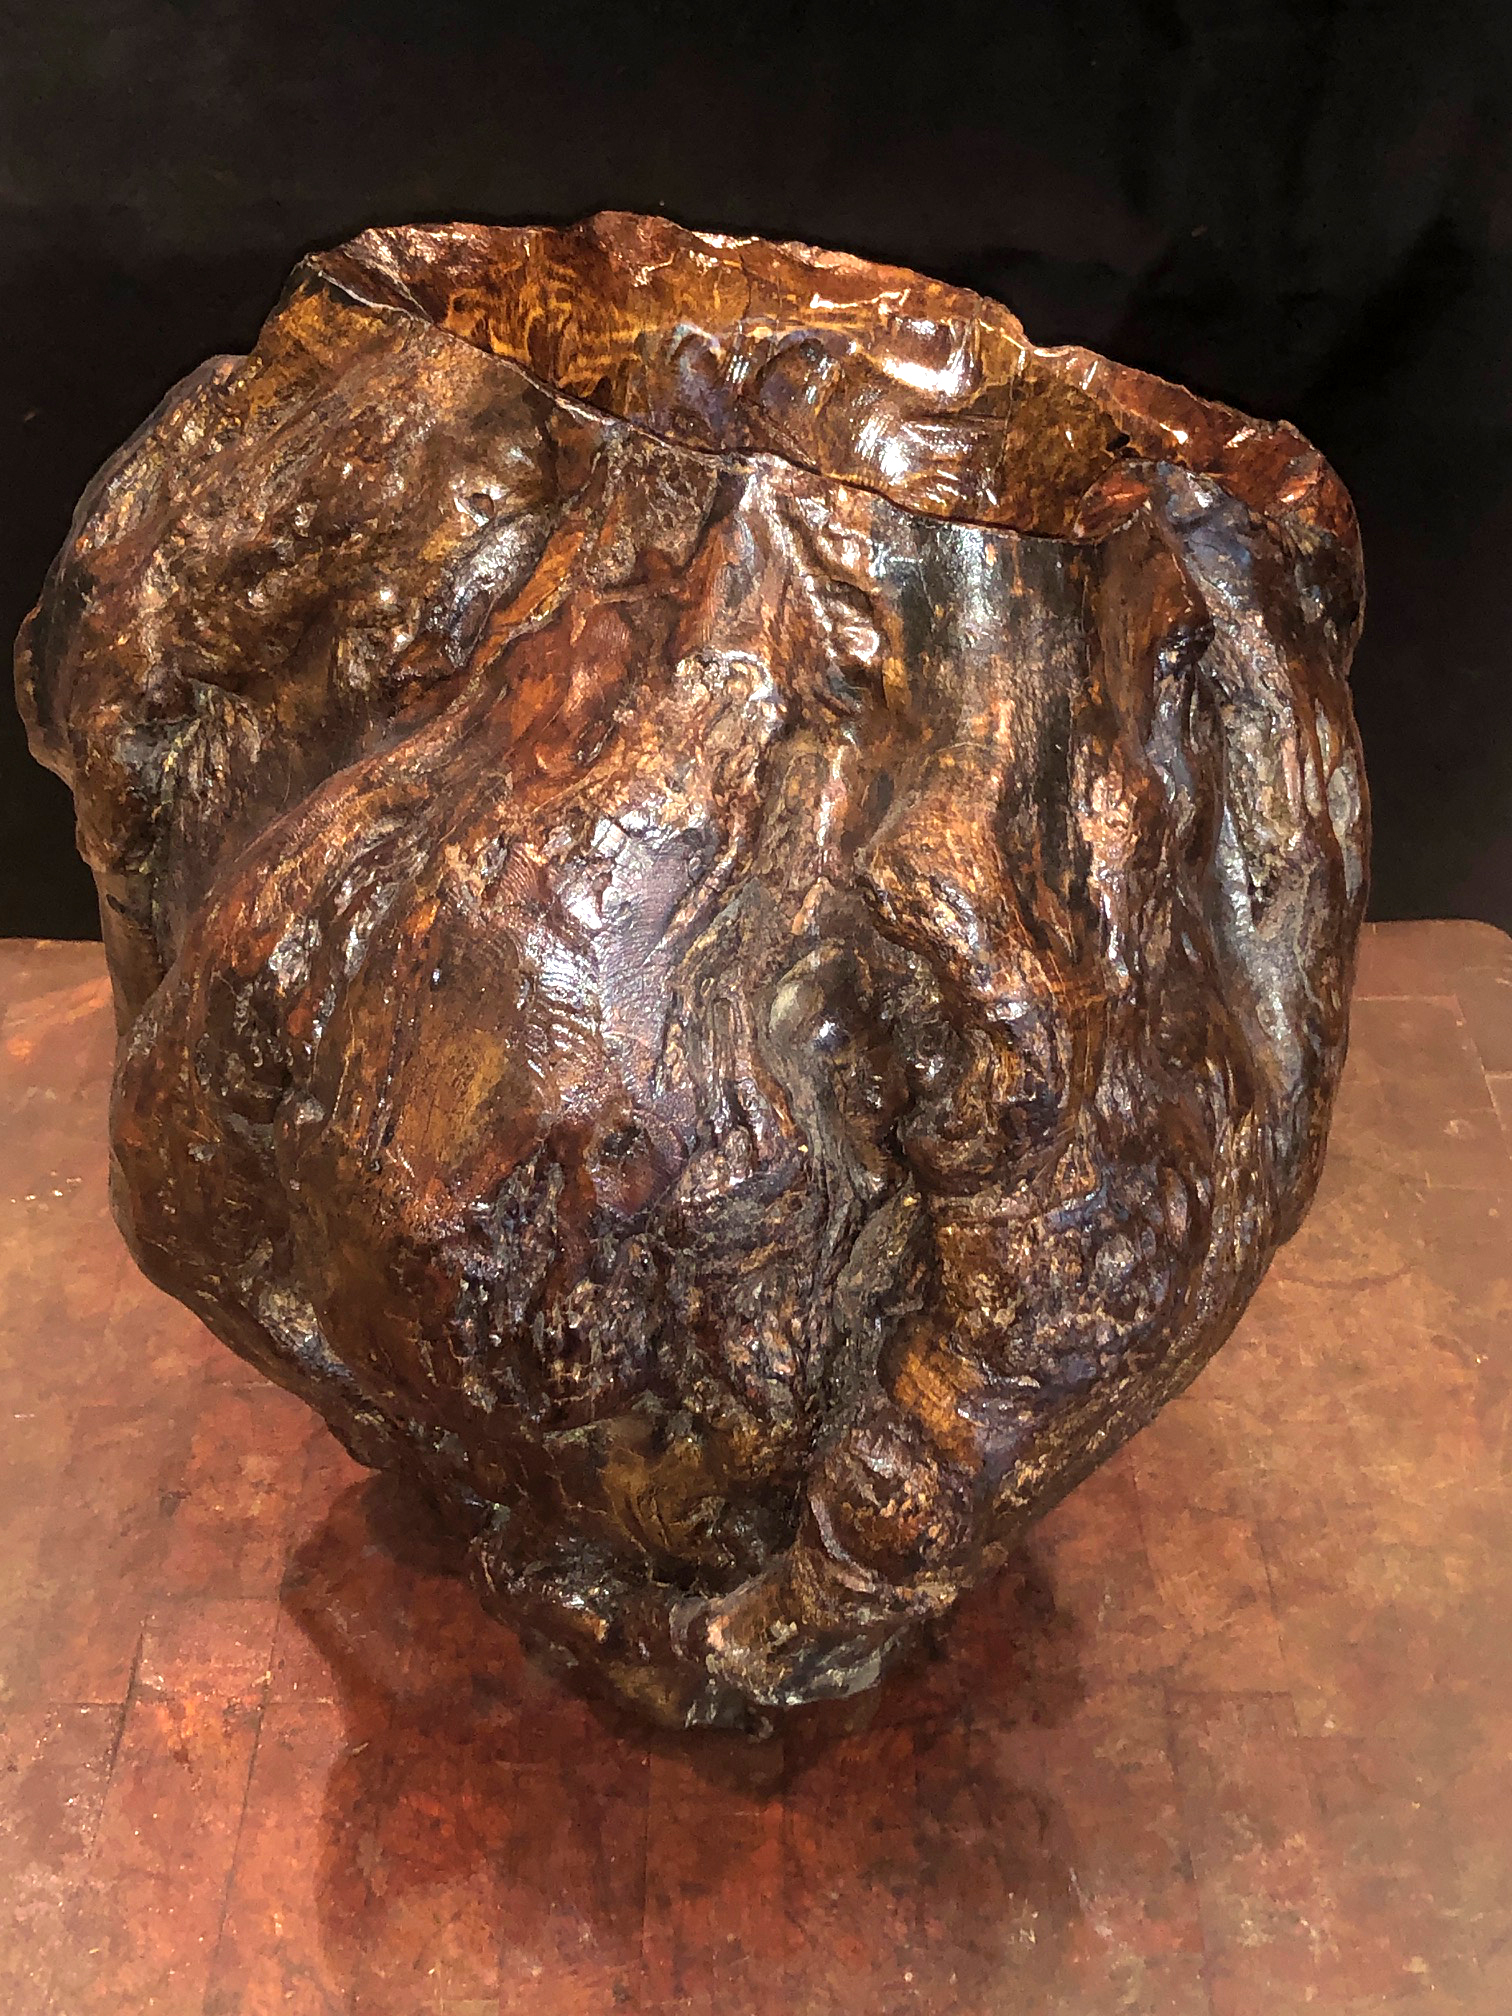 Mid-Tree Burl by Bobby Jacobs